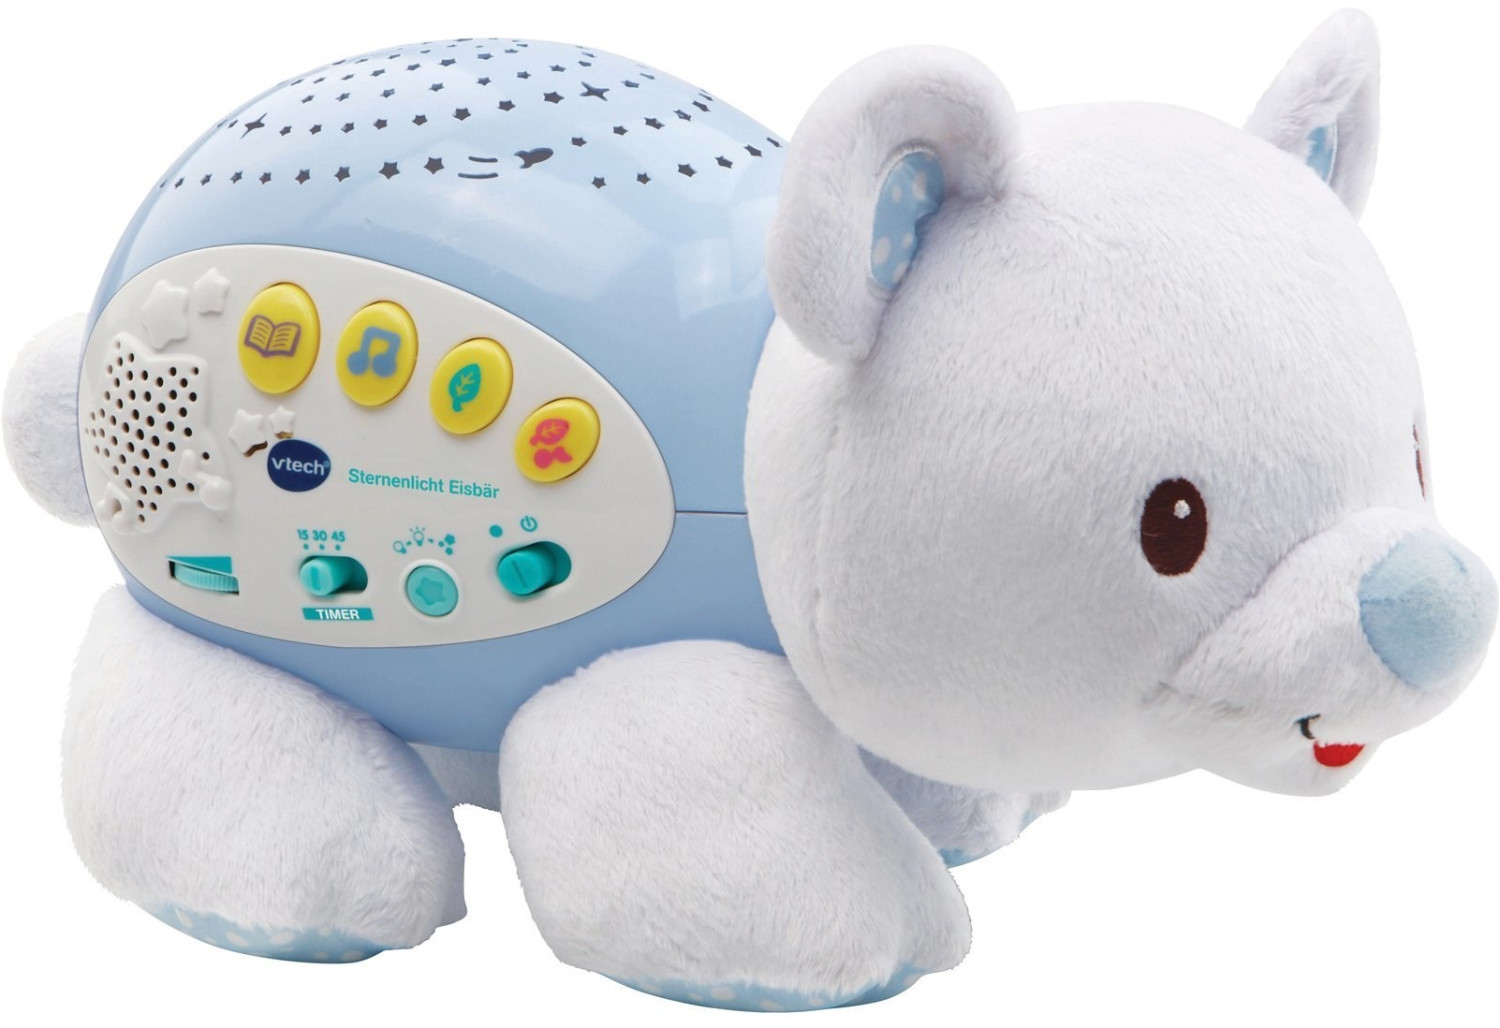 Vtech baby - ourson dodo nuit etoilee, jouets 1er age